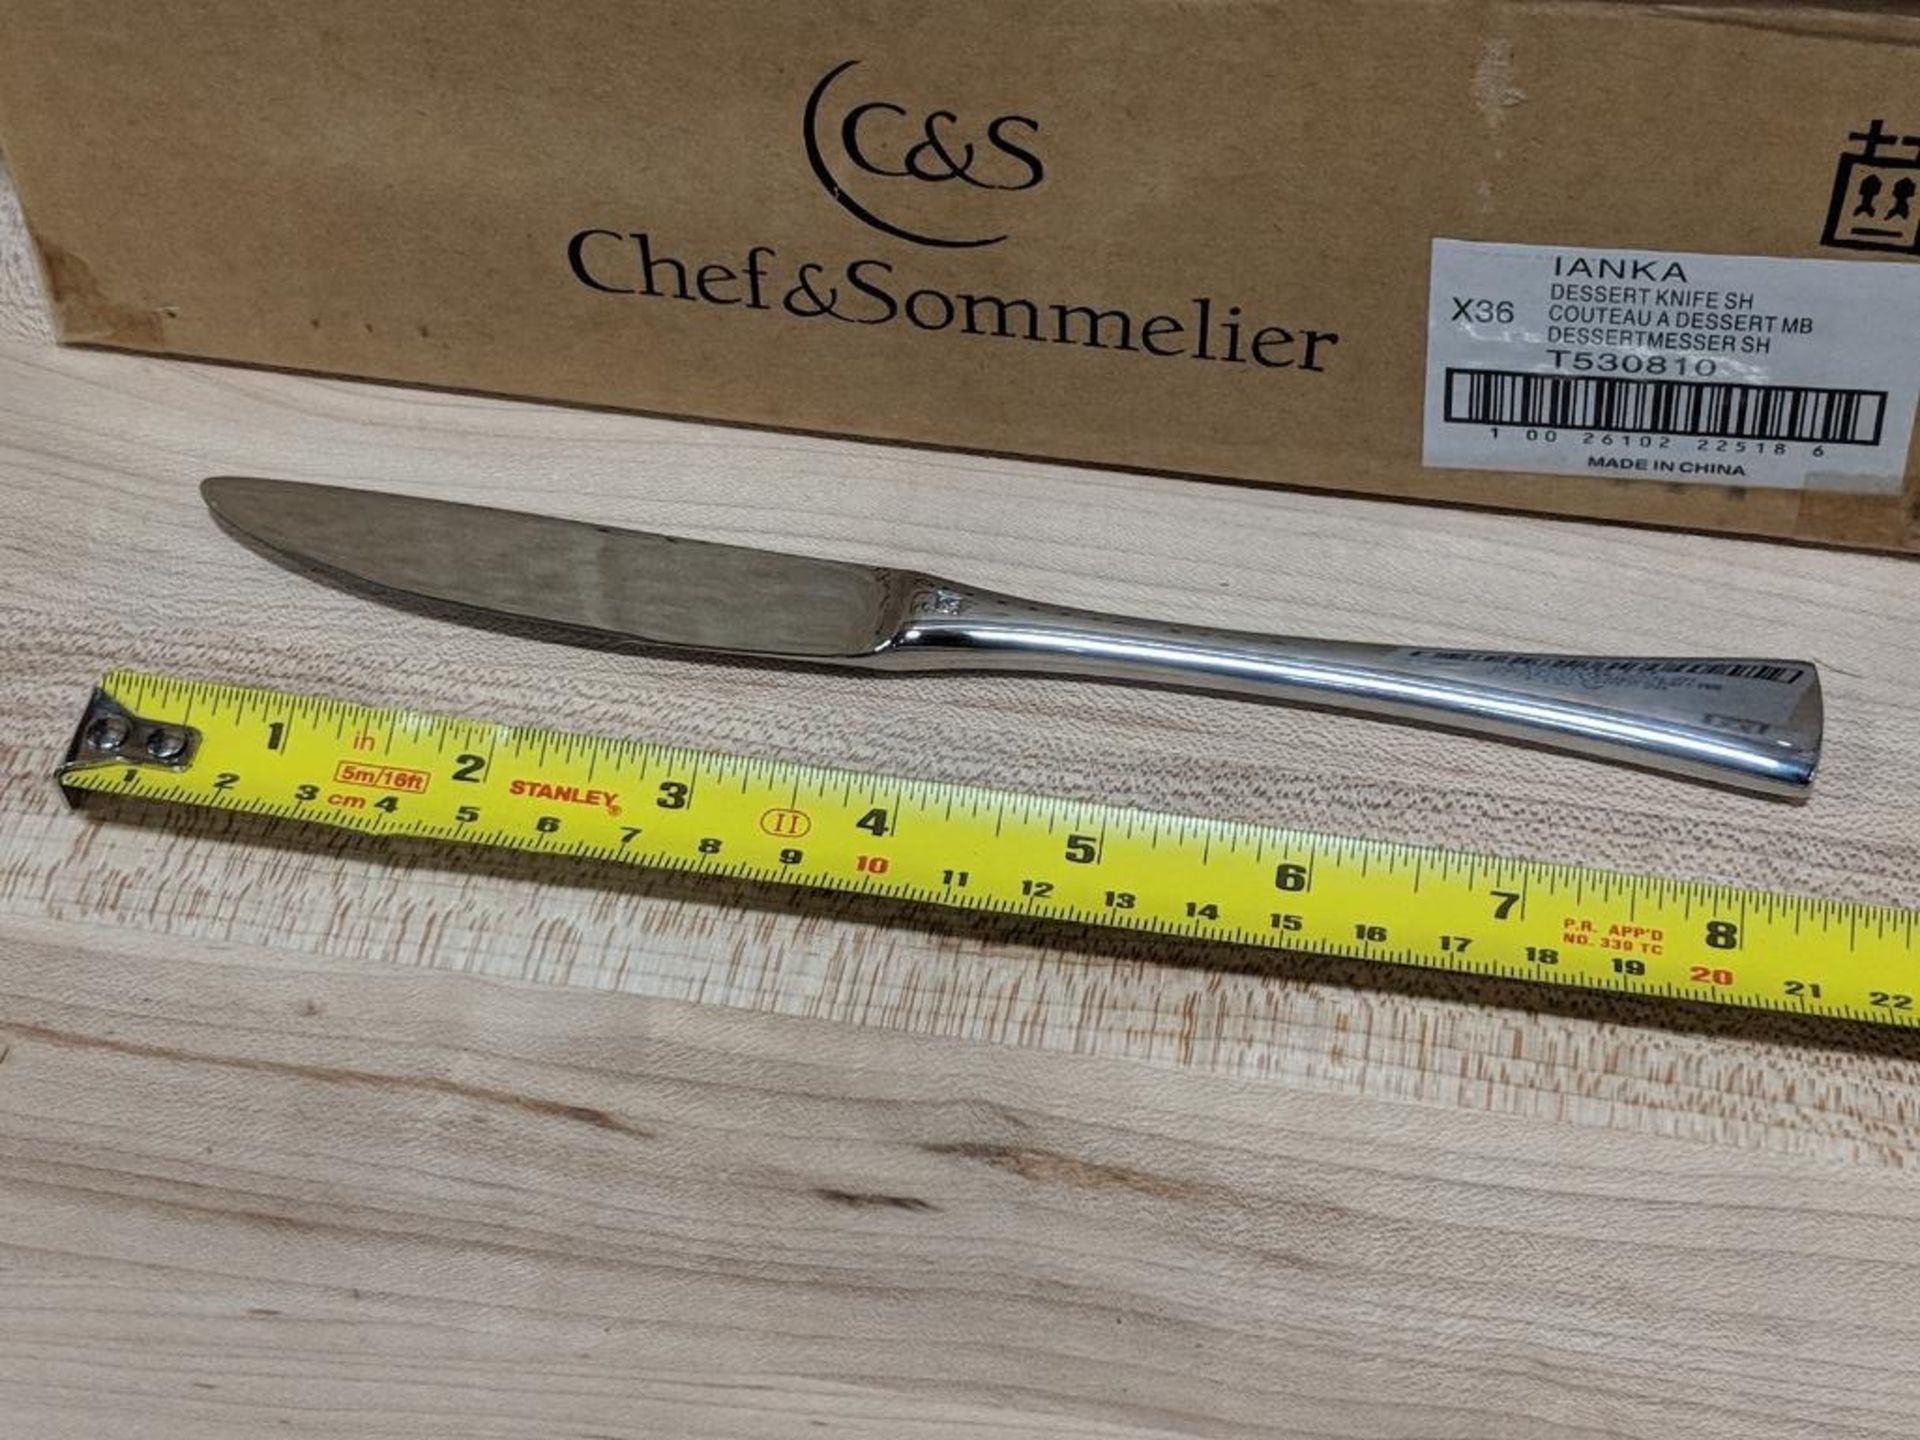 CHEF & SOMMELIER T5308 IANKA 8 1/4" 18/10 EXTRA HEAVY WEIGHT STAINLESS STEEL DESSERT KNIFE - 12/CASE - Image 2 of 2